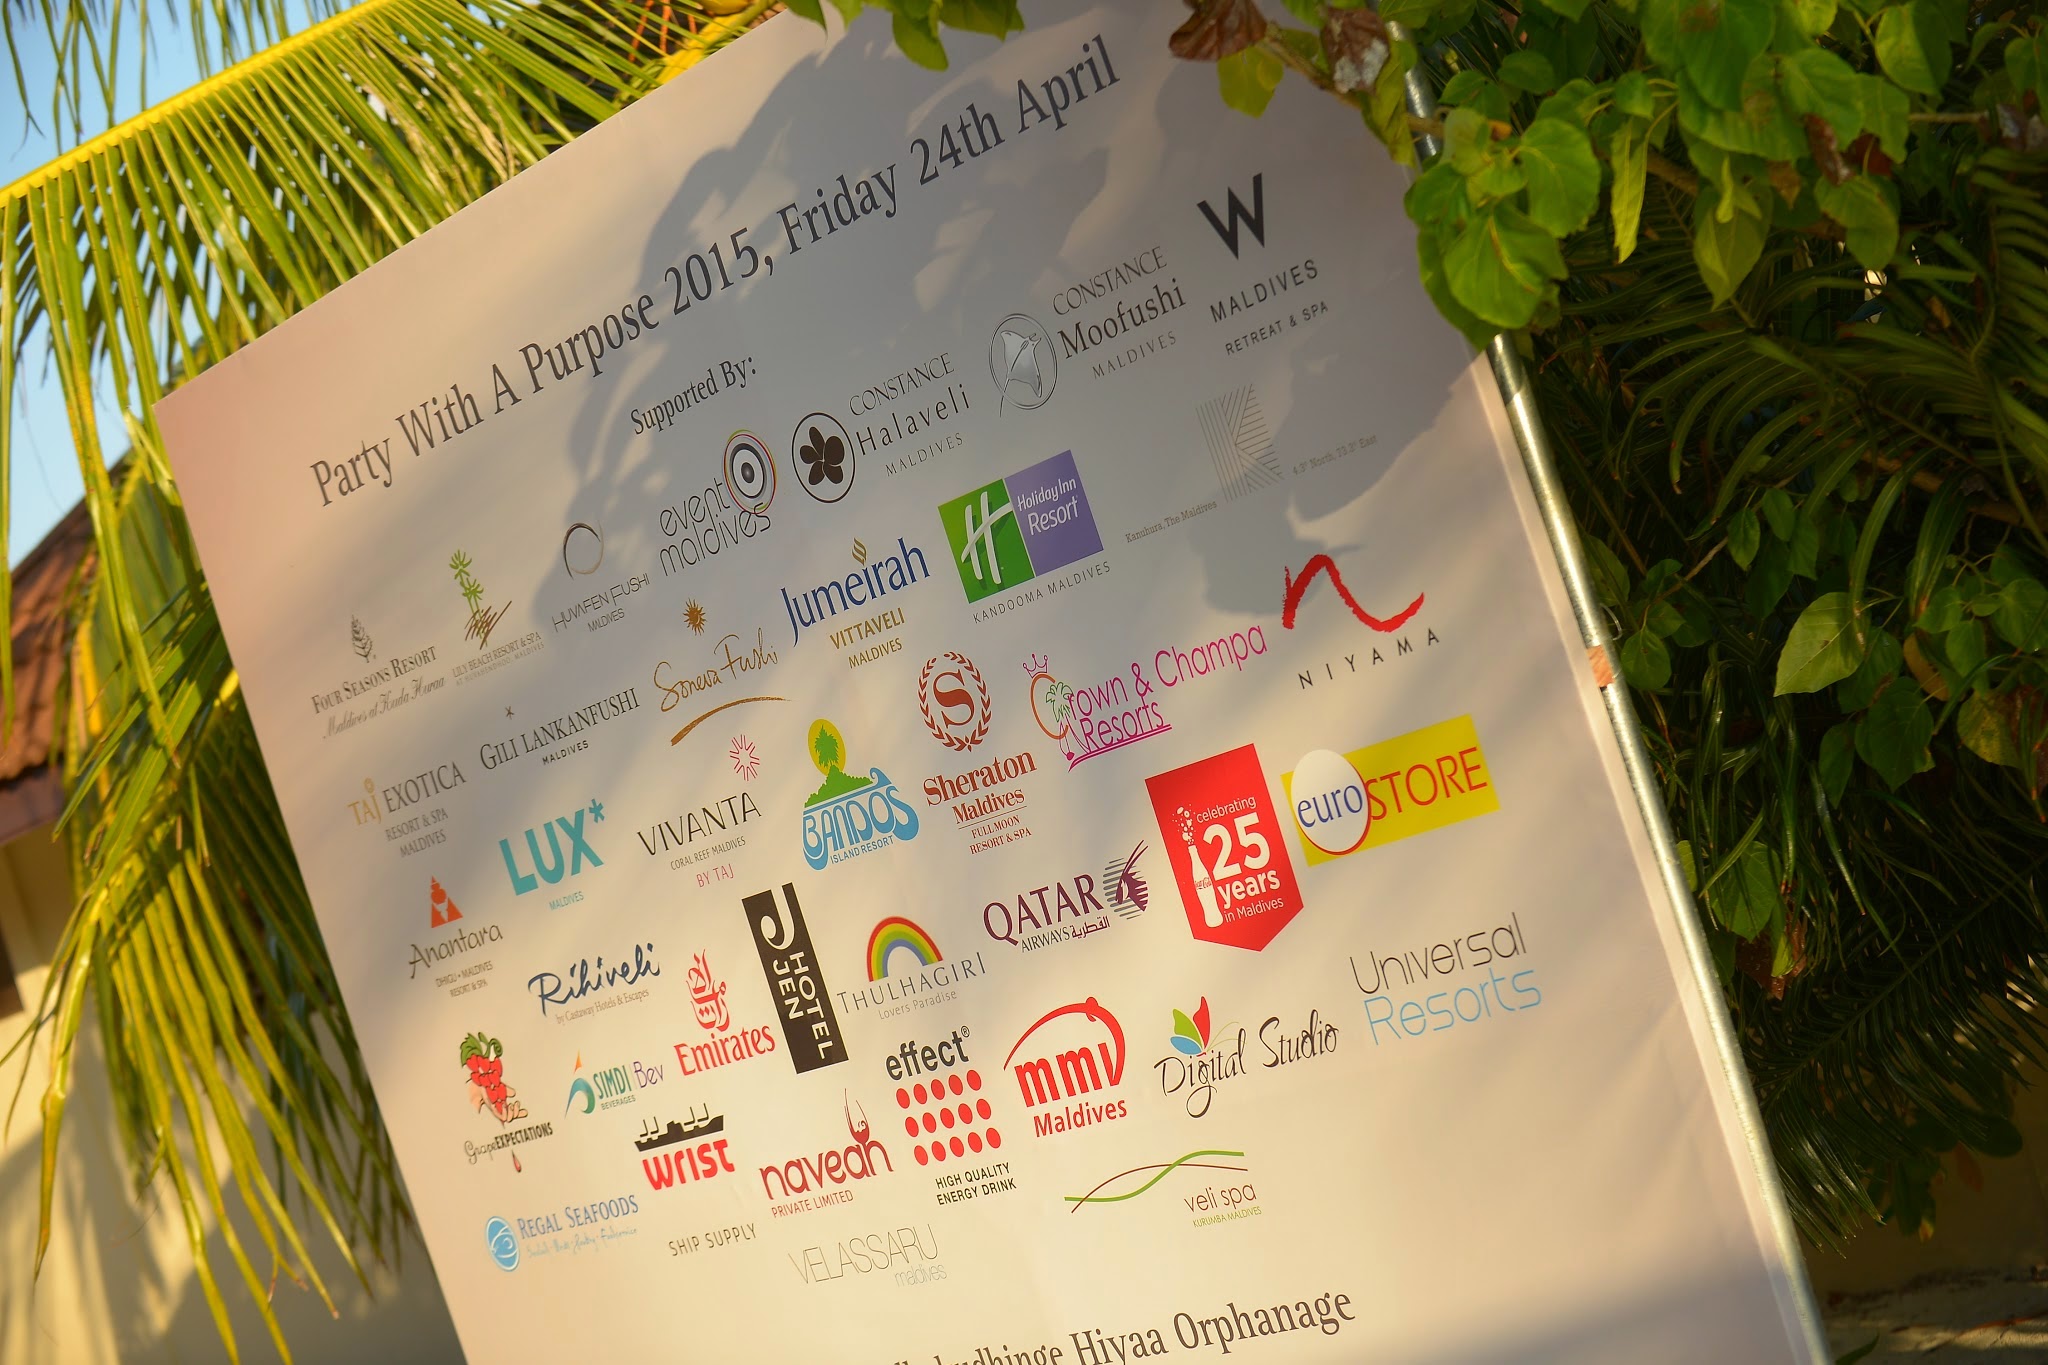 Sponsors for Party with a Purpose